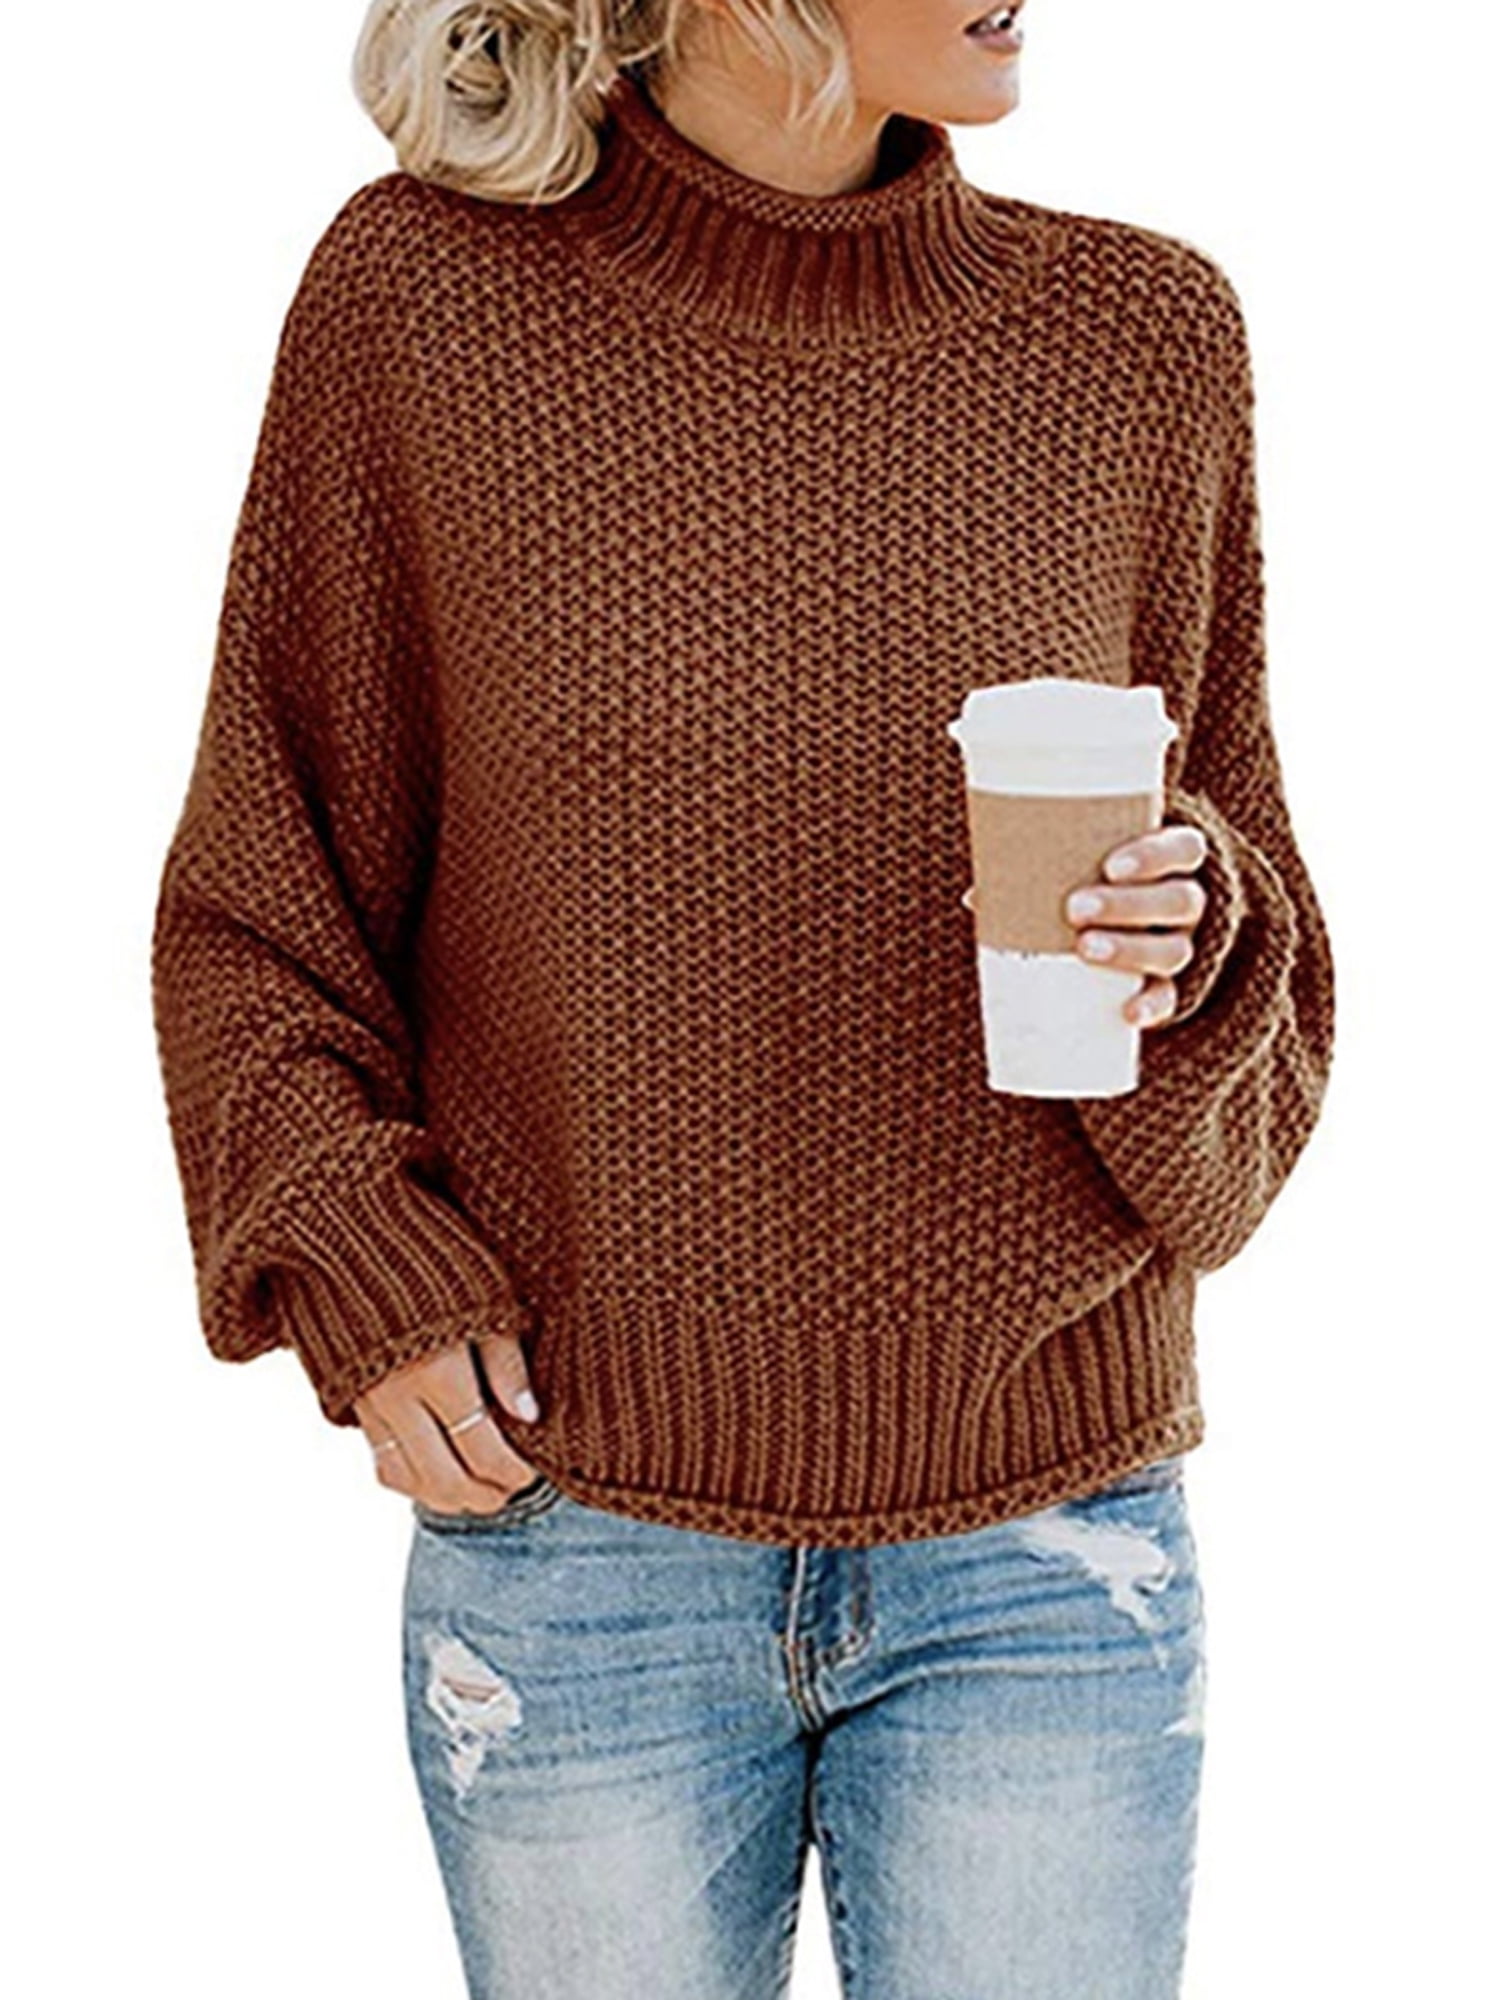 Women's Long Sleeve Sweaters Turtleneck Loose Soft Knitted Casual ...